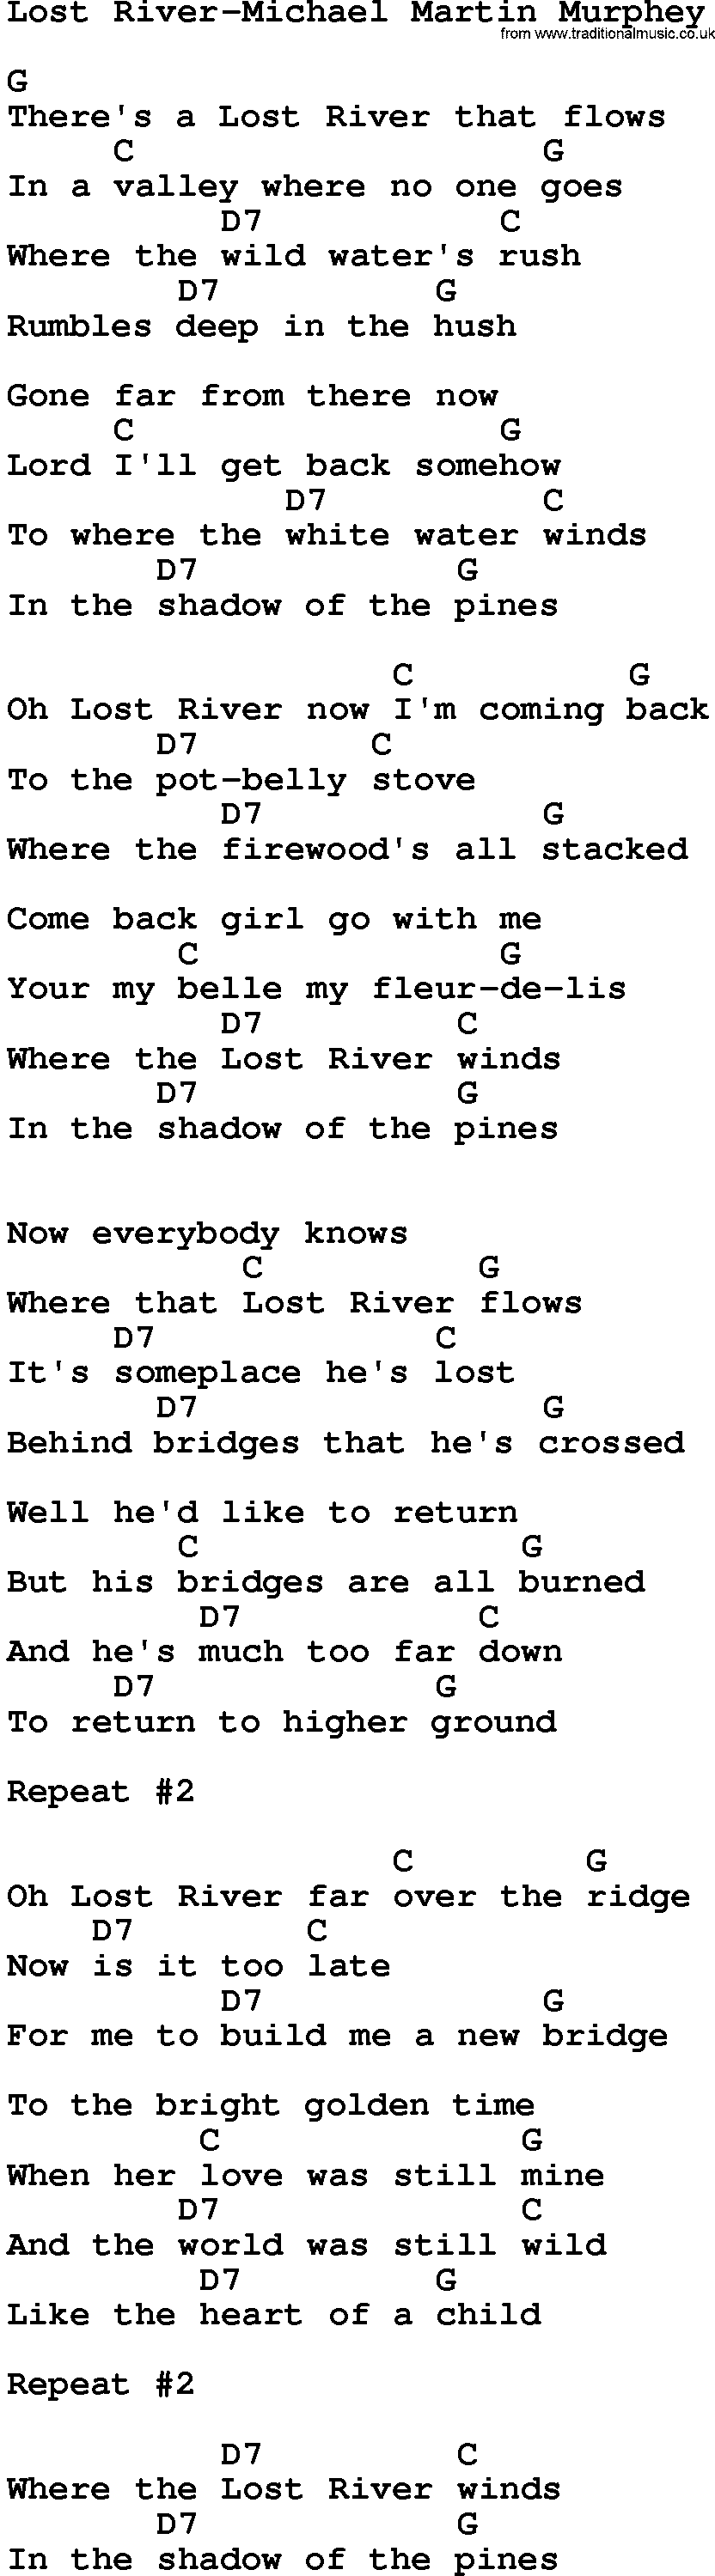 Country music song: Lost River-Michael Martin Murphey lyrics and chords